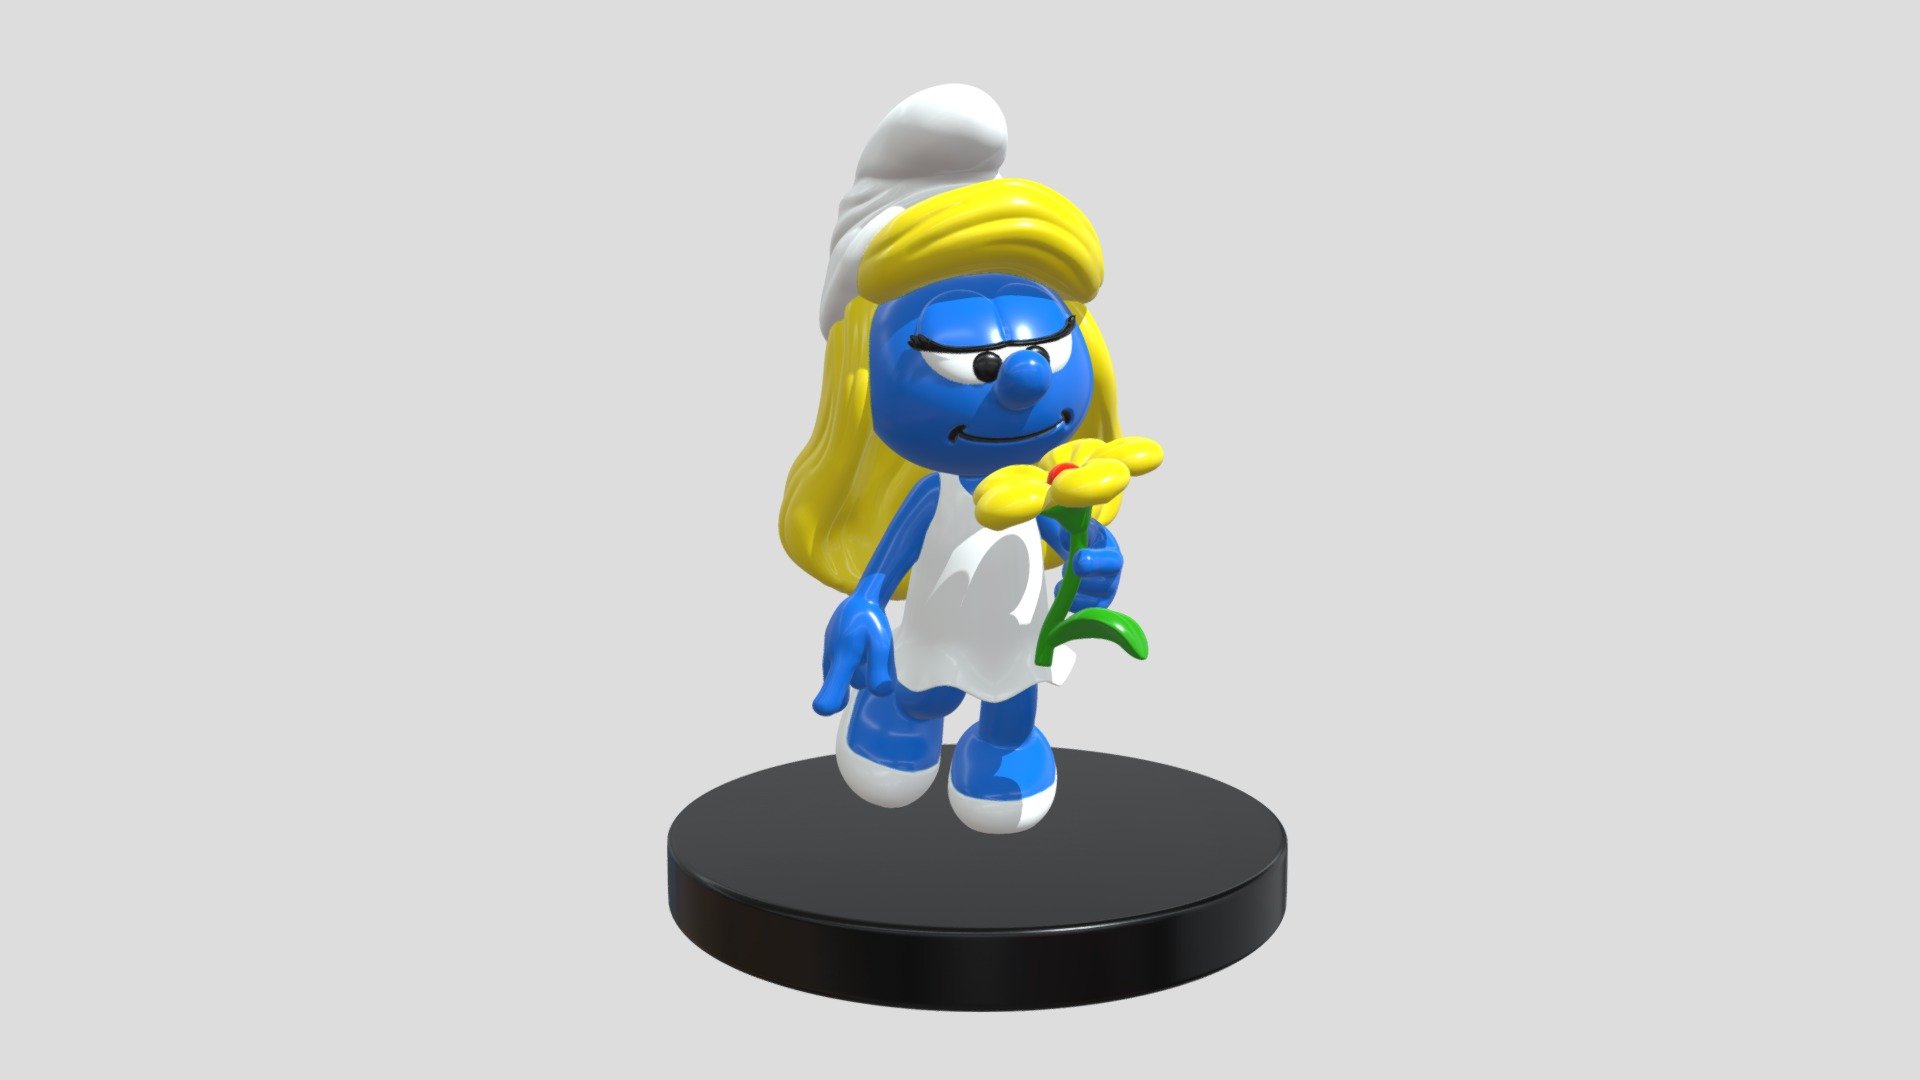 This is Smurfette figurine in 3D printable model,
base on the style guide of 18 Models shape smurfs GUÍA - 2018.
Size:114.3x90x90mm

There are many version of Smurfs, this model is sculpted according to 18 Models shape smurfs GUÍA - 2018. Please also take a look for my other Smurf characters in this series! Many more coming up! - The Smurfs - Smurfette - 3D model by sculptor101 3d model